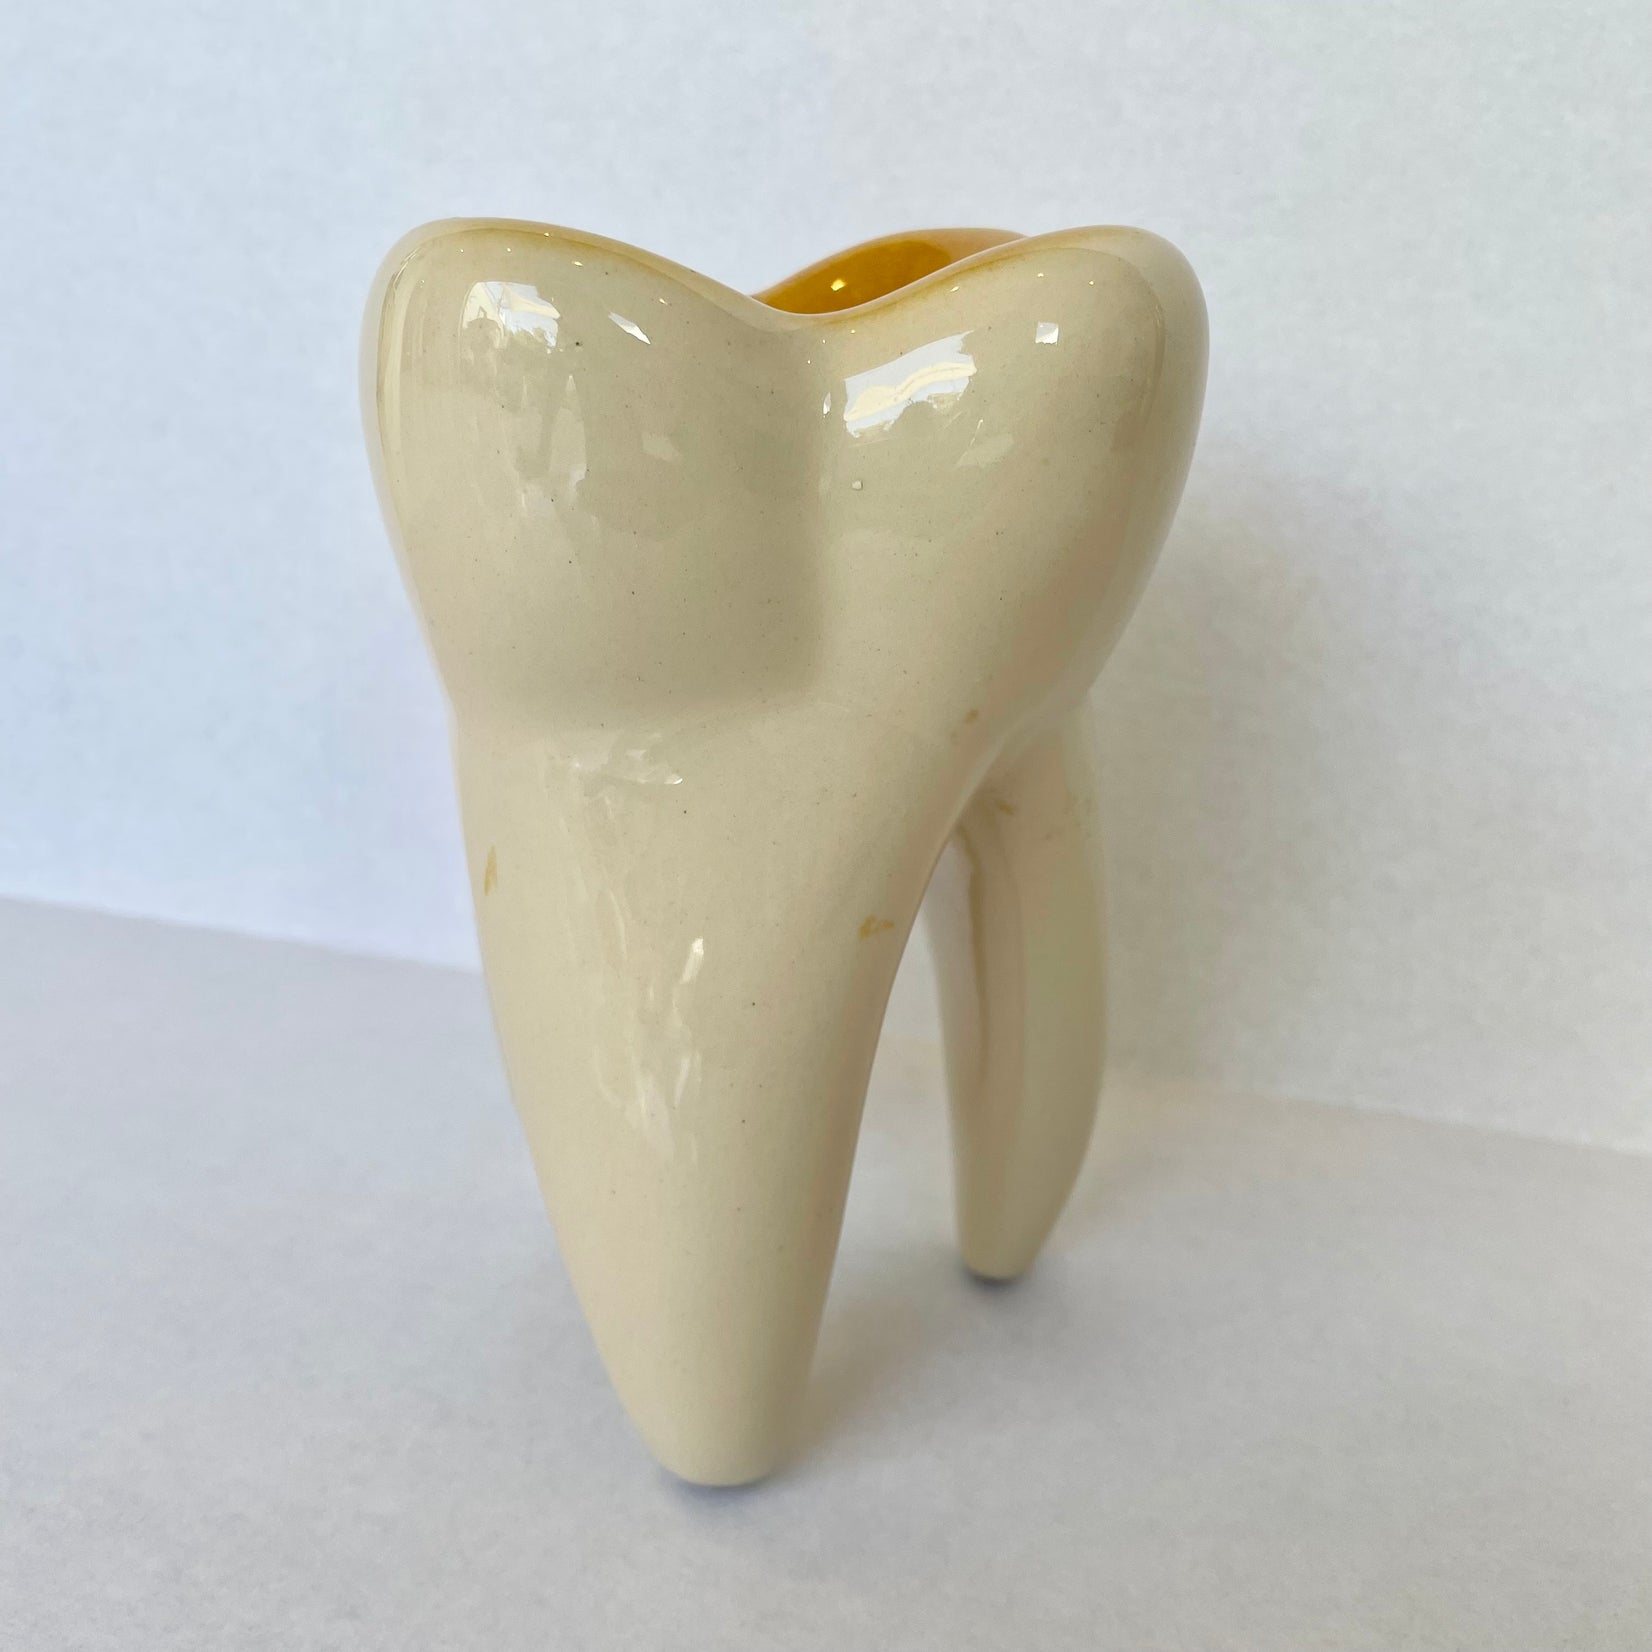 Giant Ceramic Tooth Catchall, 1950s France